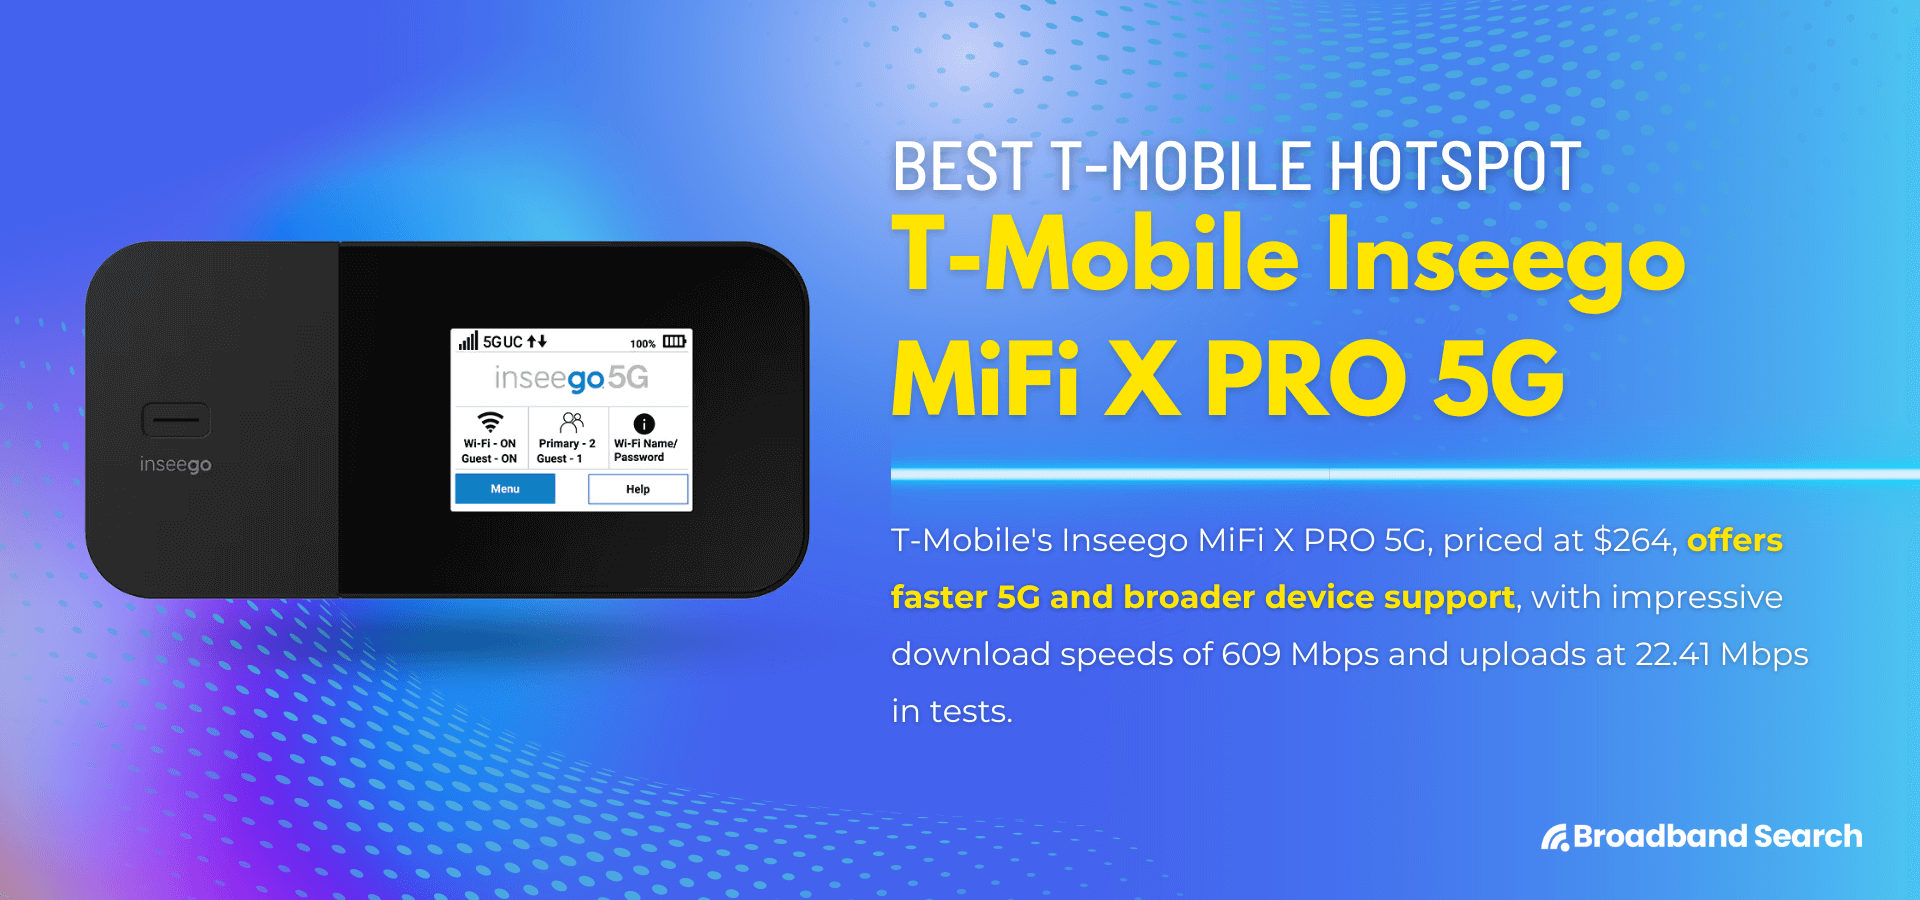 Product details of the mobile hotspot T-Mobile Inseego MiFi X Pro 5G